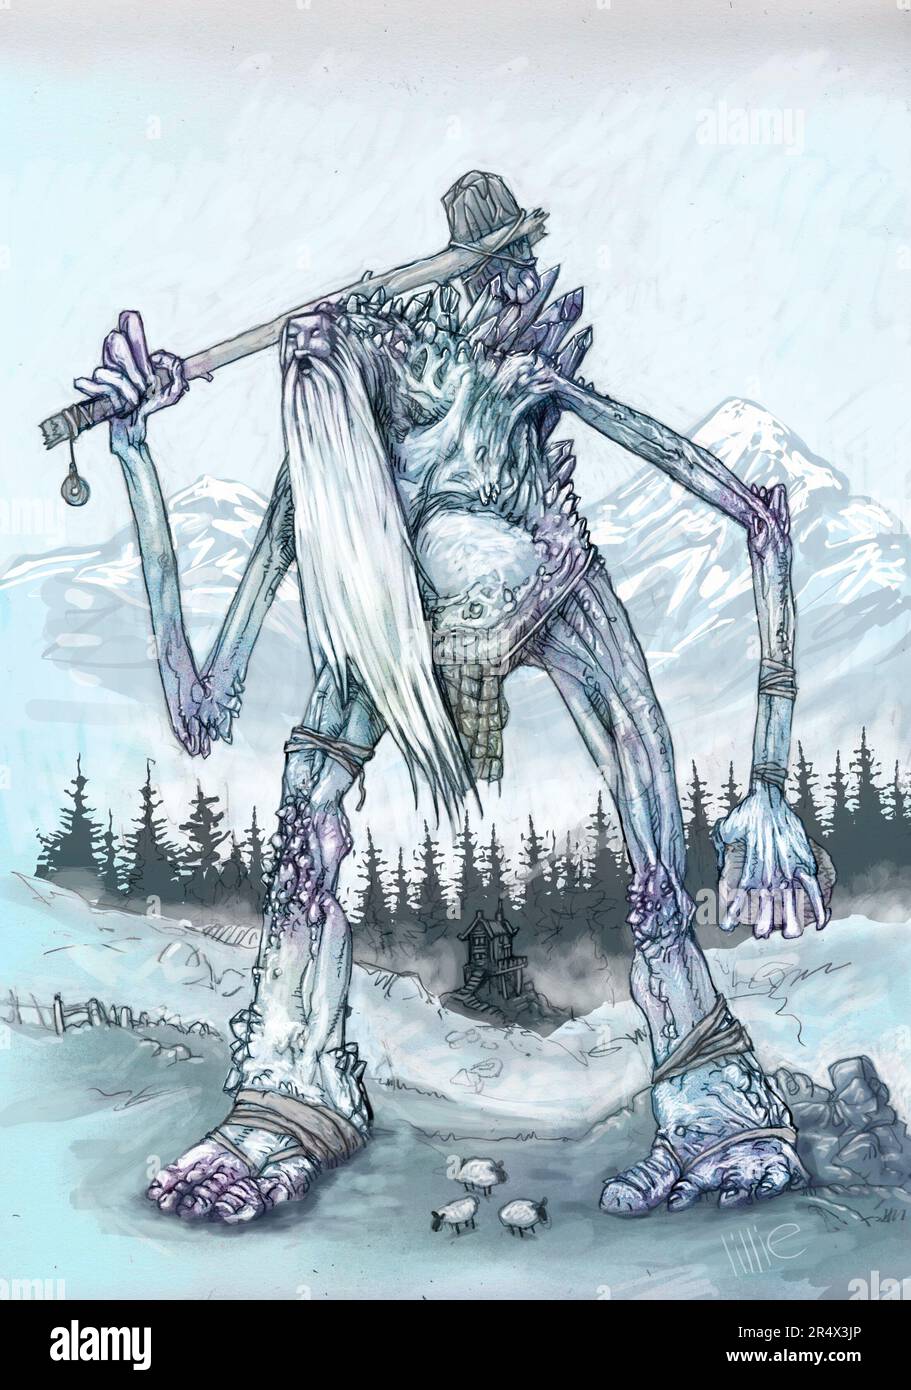 Art: frost giant, or jötunn, holding stone axe over his shoulder, mountains & forest in the background, supernatural being from German Norse mythology Stock Photo